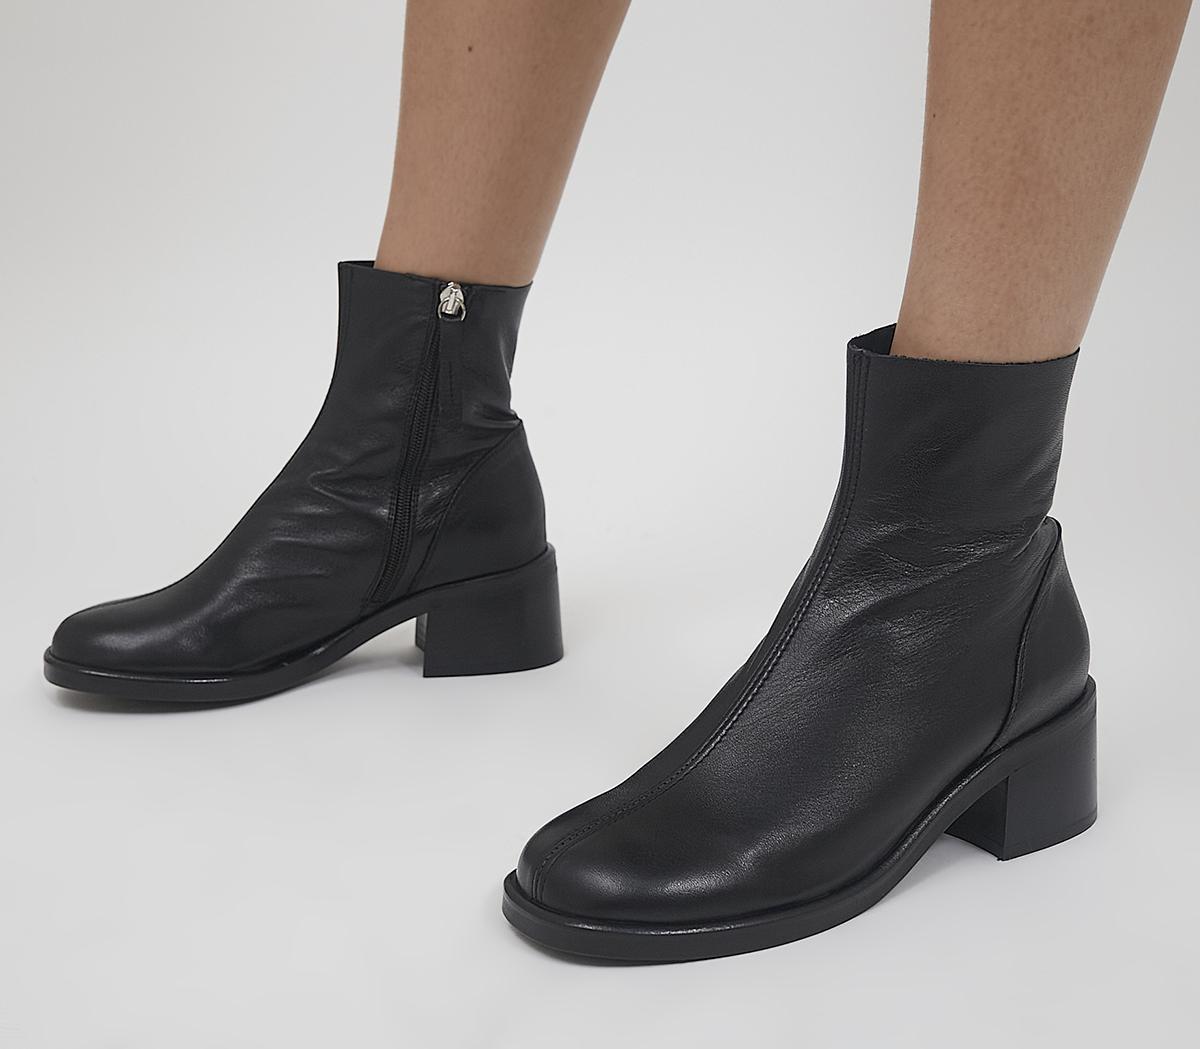 OFFICEAlicante Chunky Clean BootsBlack Leather